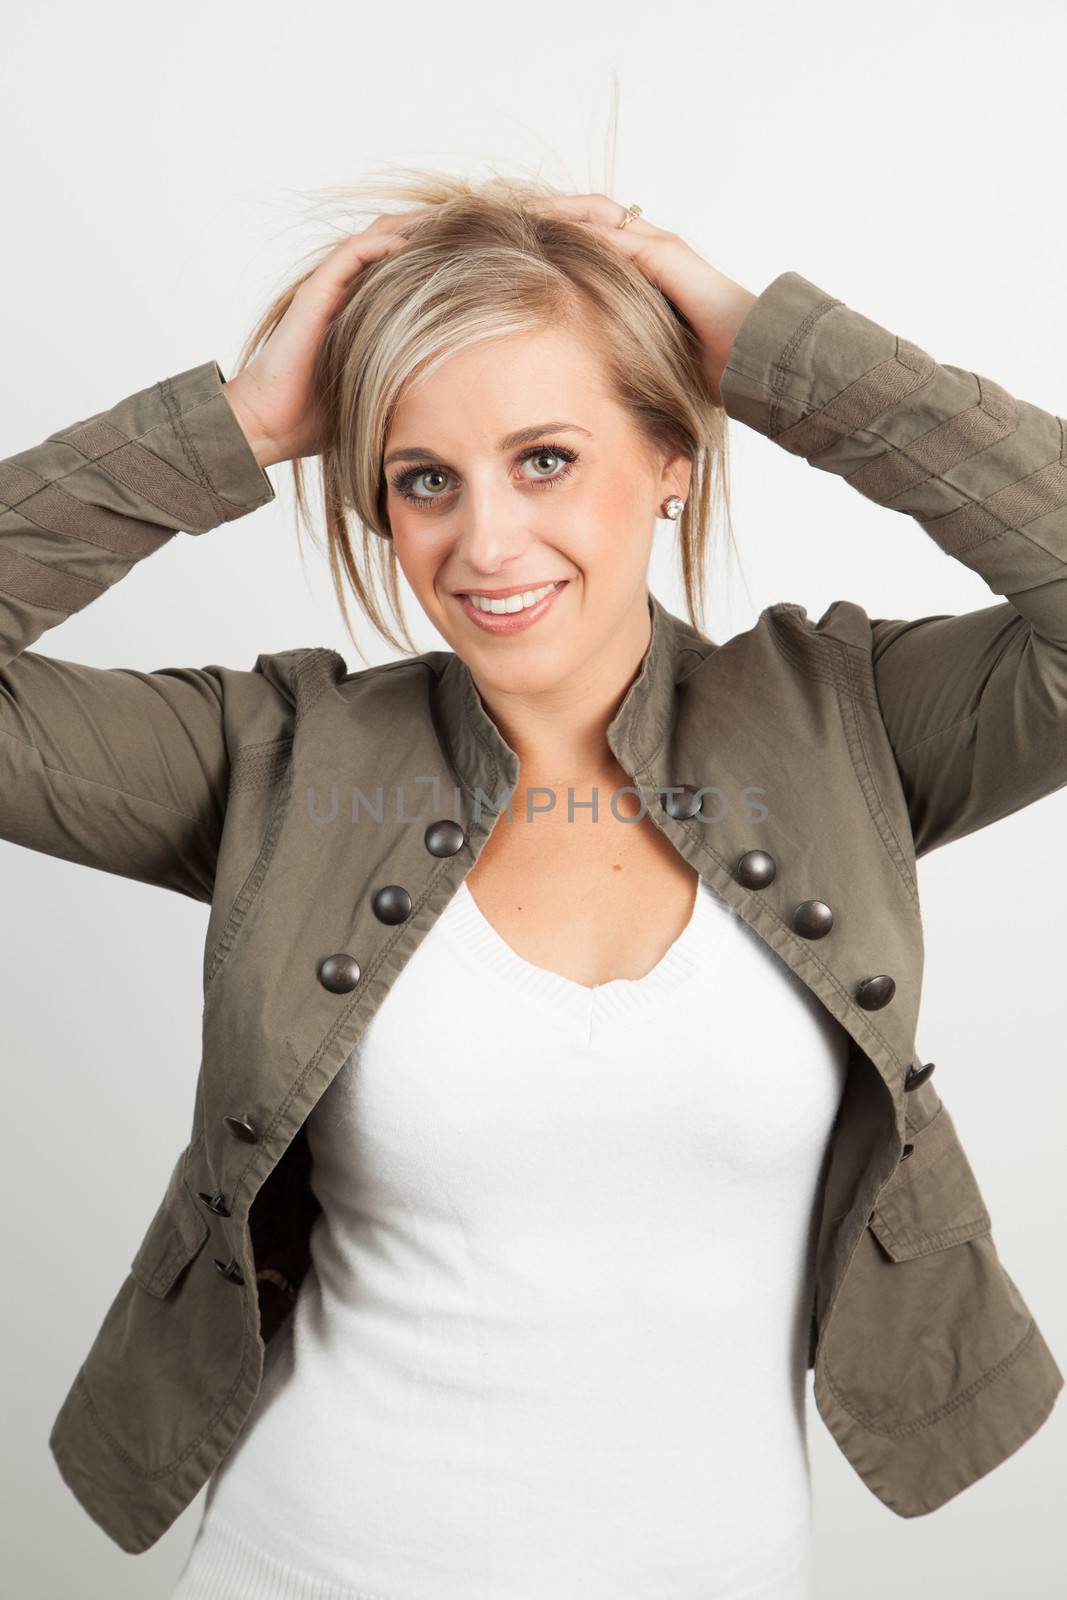 Young blond woman smiling against a white background